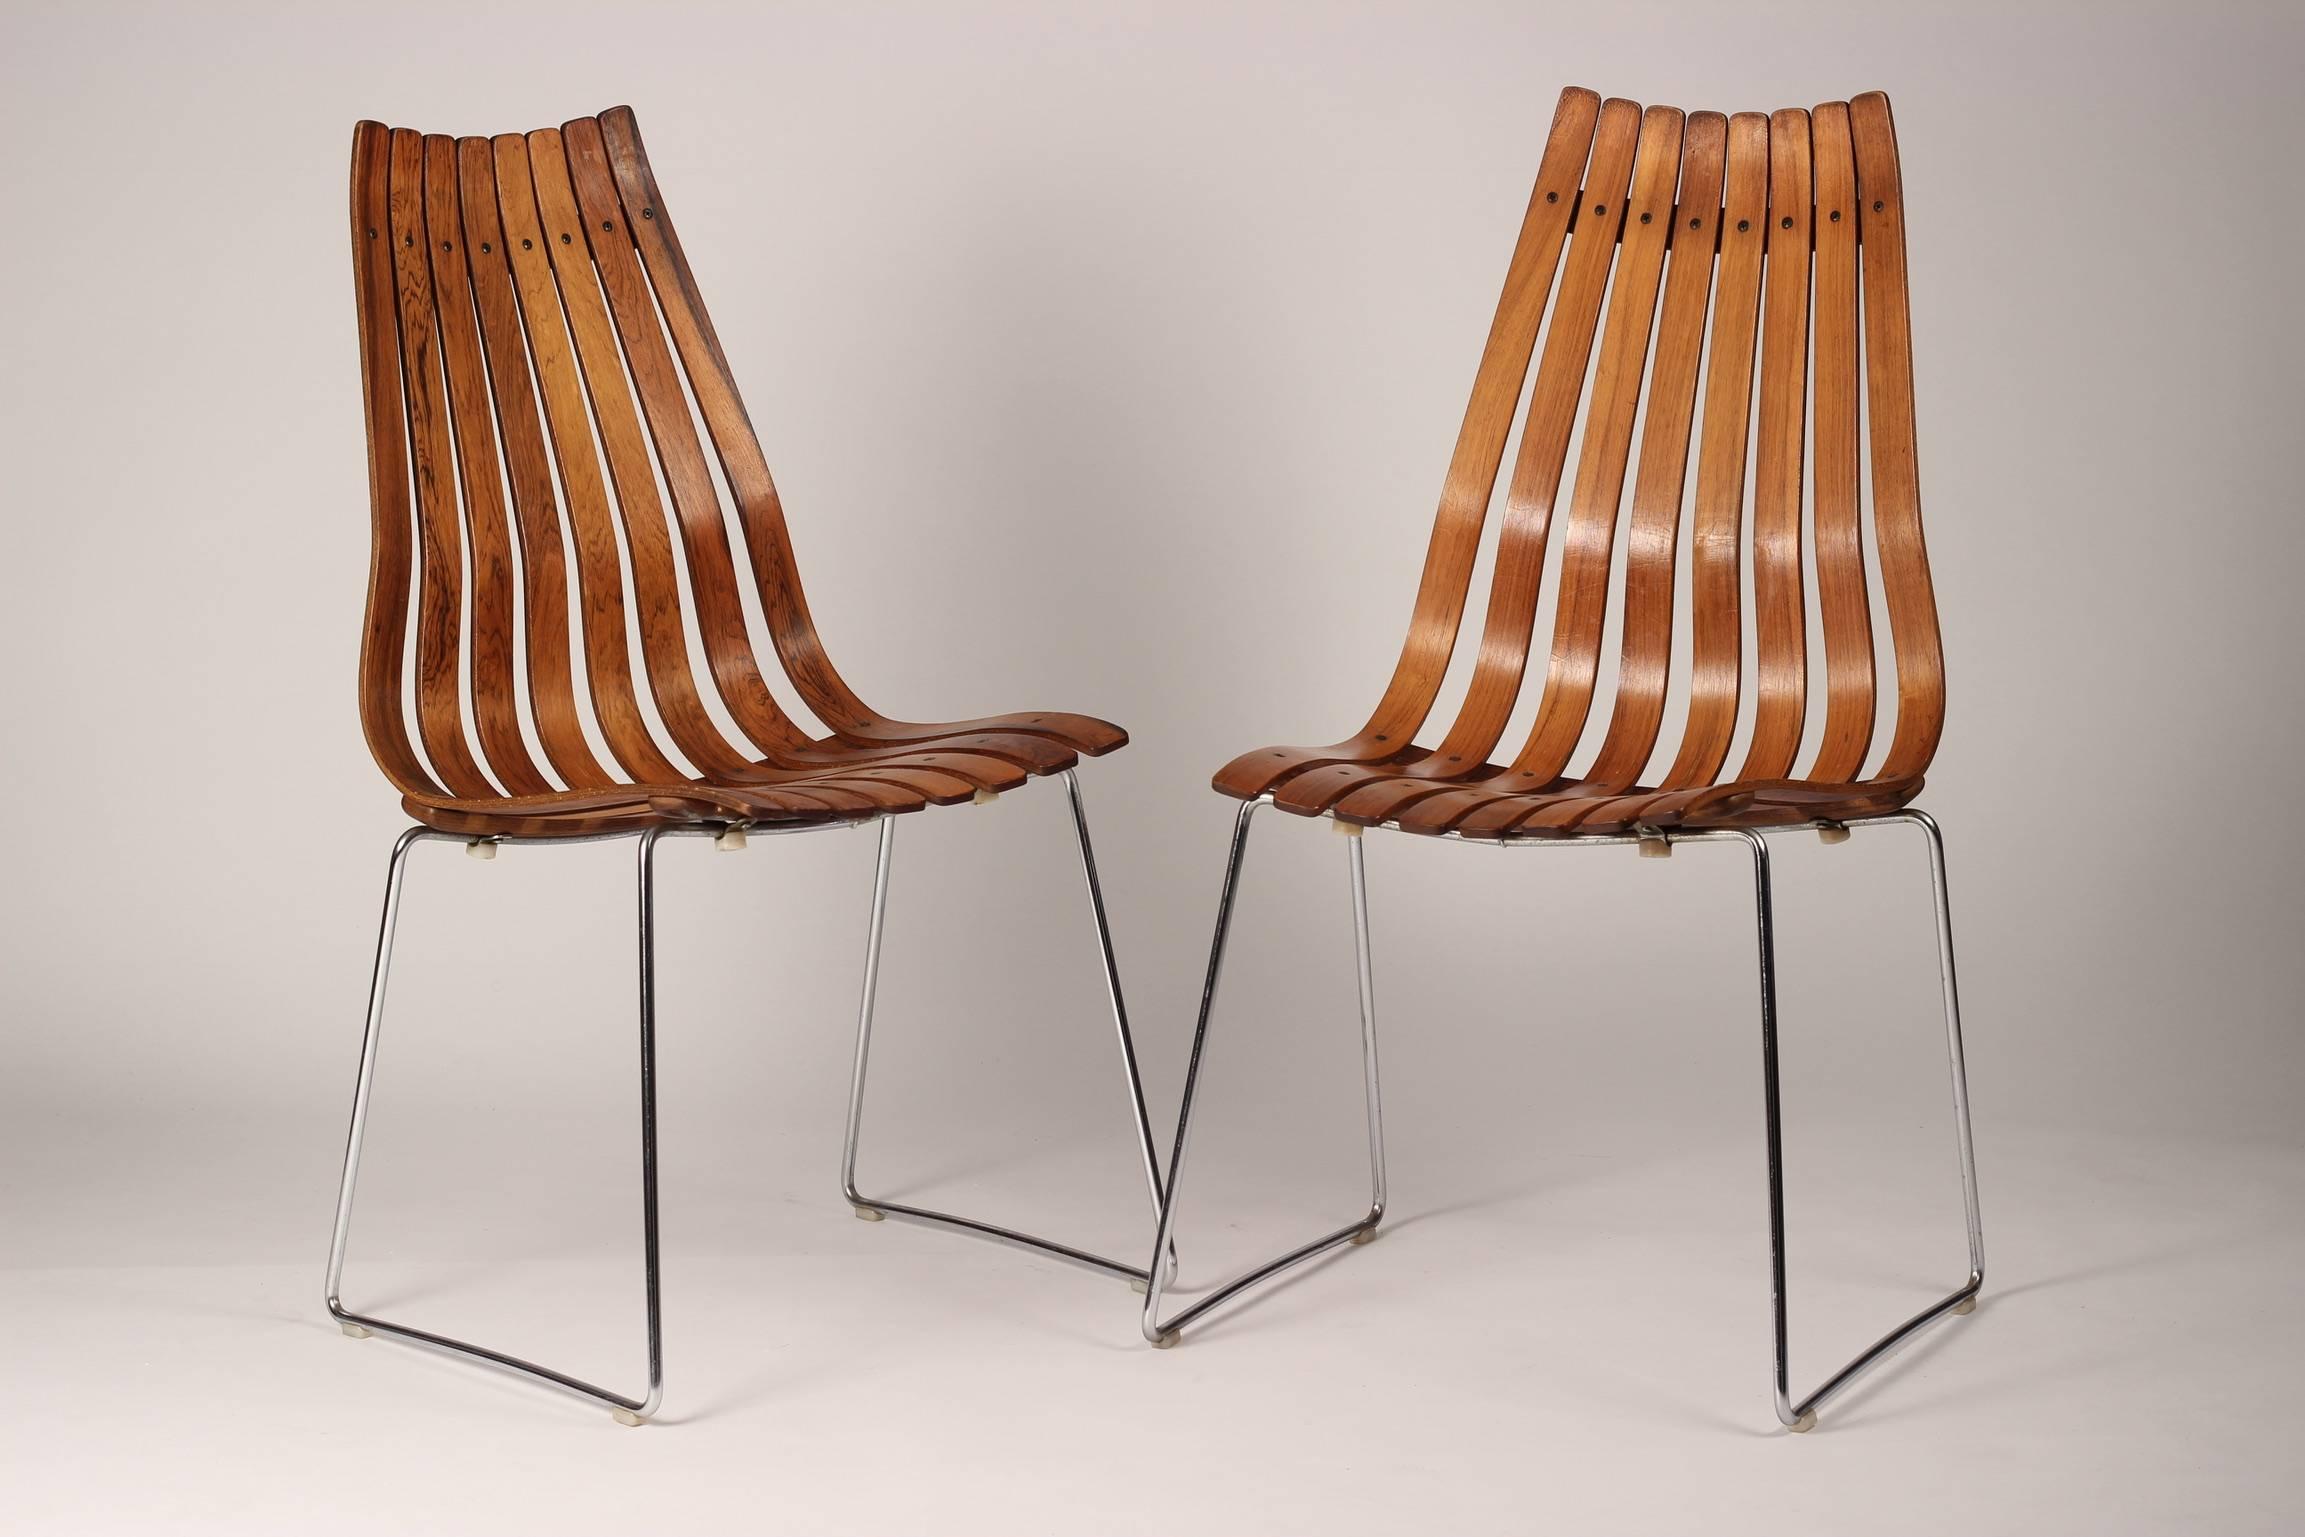 Norwegian Mid Century Modern Rosewood Dining Chairs by Hans Brattrud for Hove Møbler 